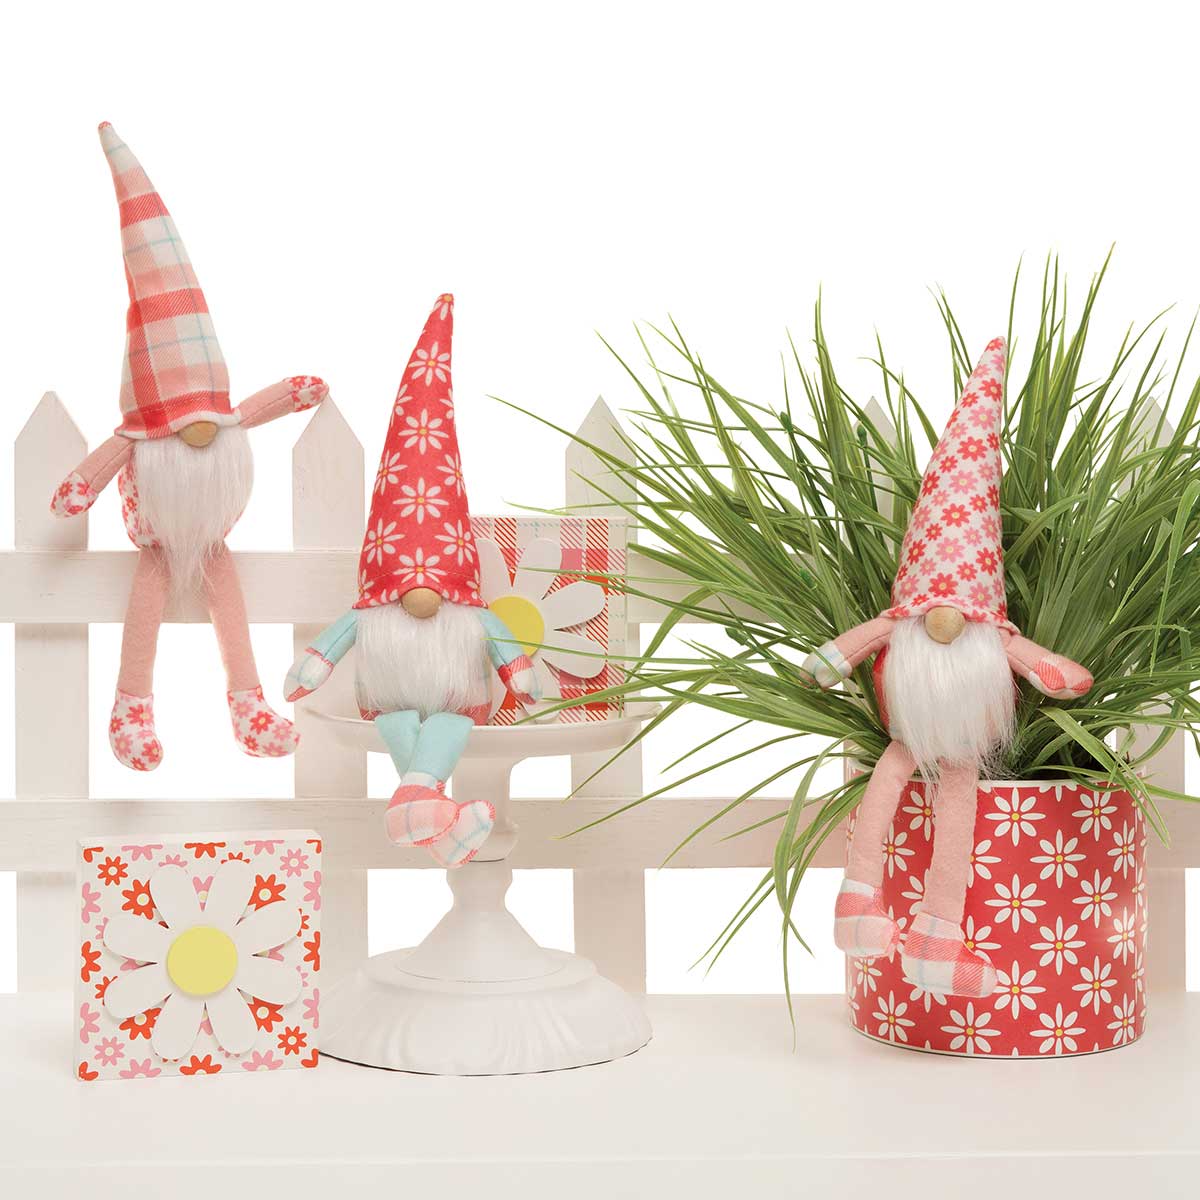 CORAL FAIR GNOMECORAL//WHITE/BLUE WITH WIRED HAT,